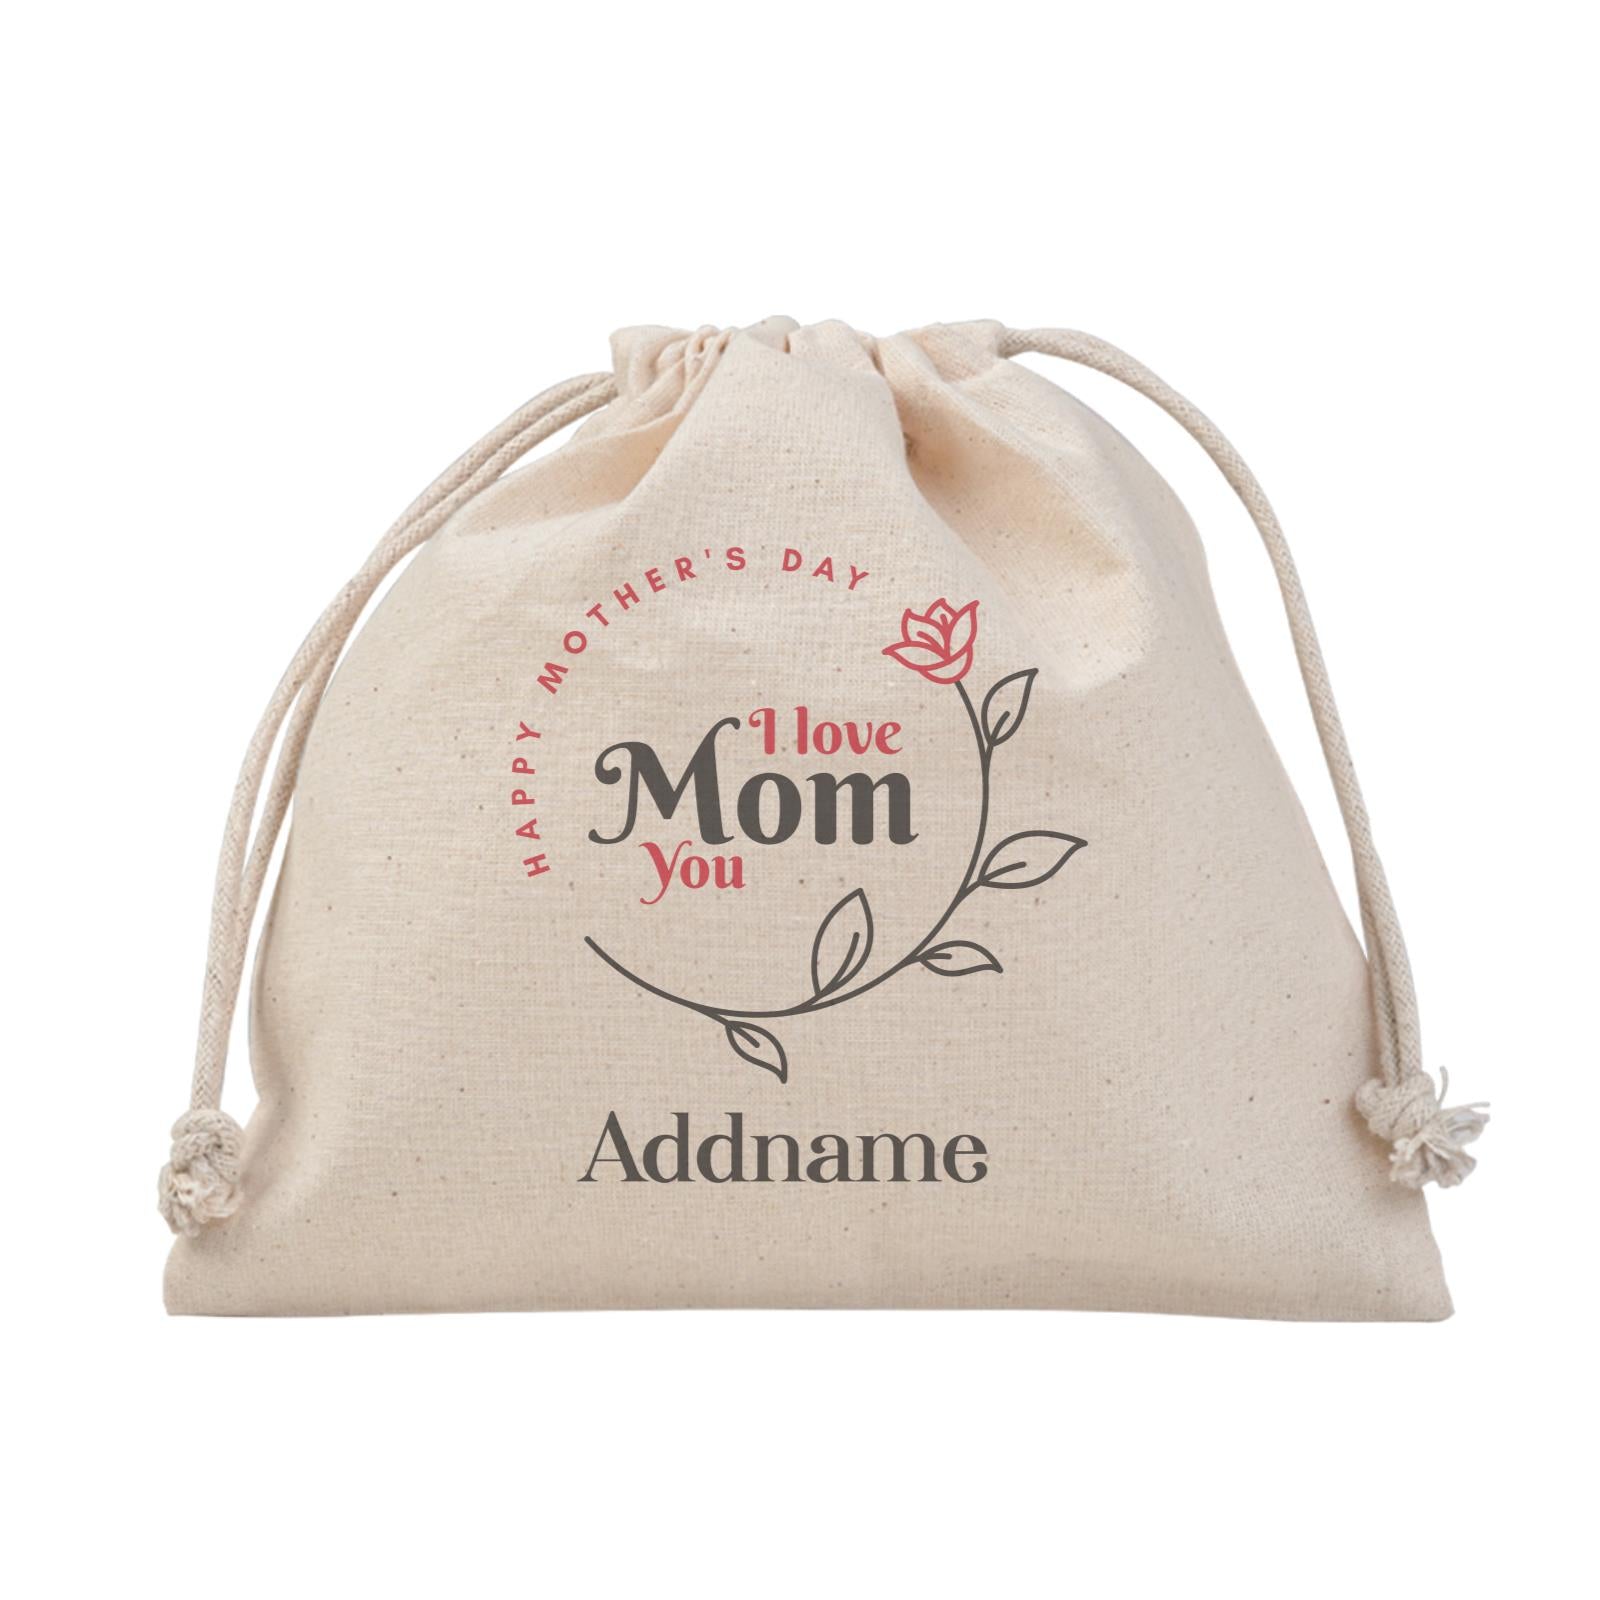 [MOTHER'S DAY 2021] I Love You Mom Satchel